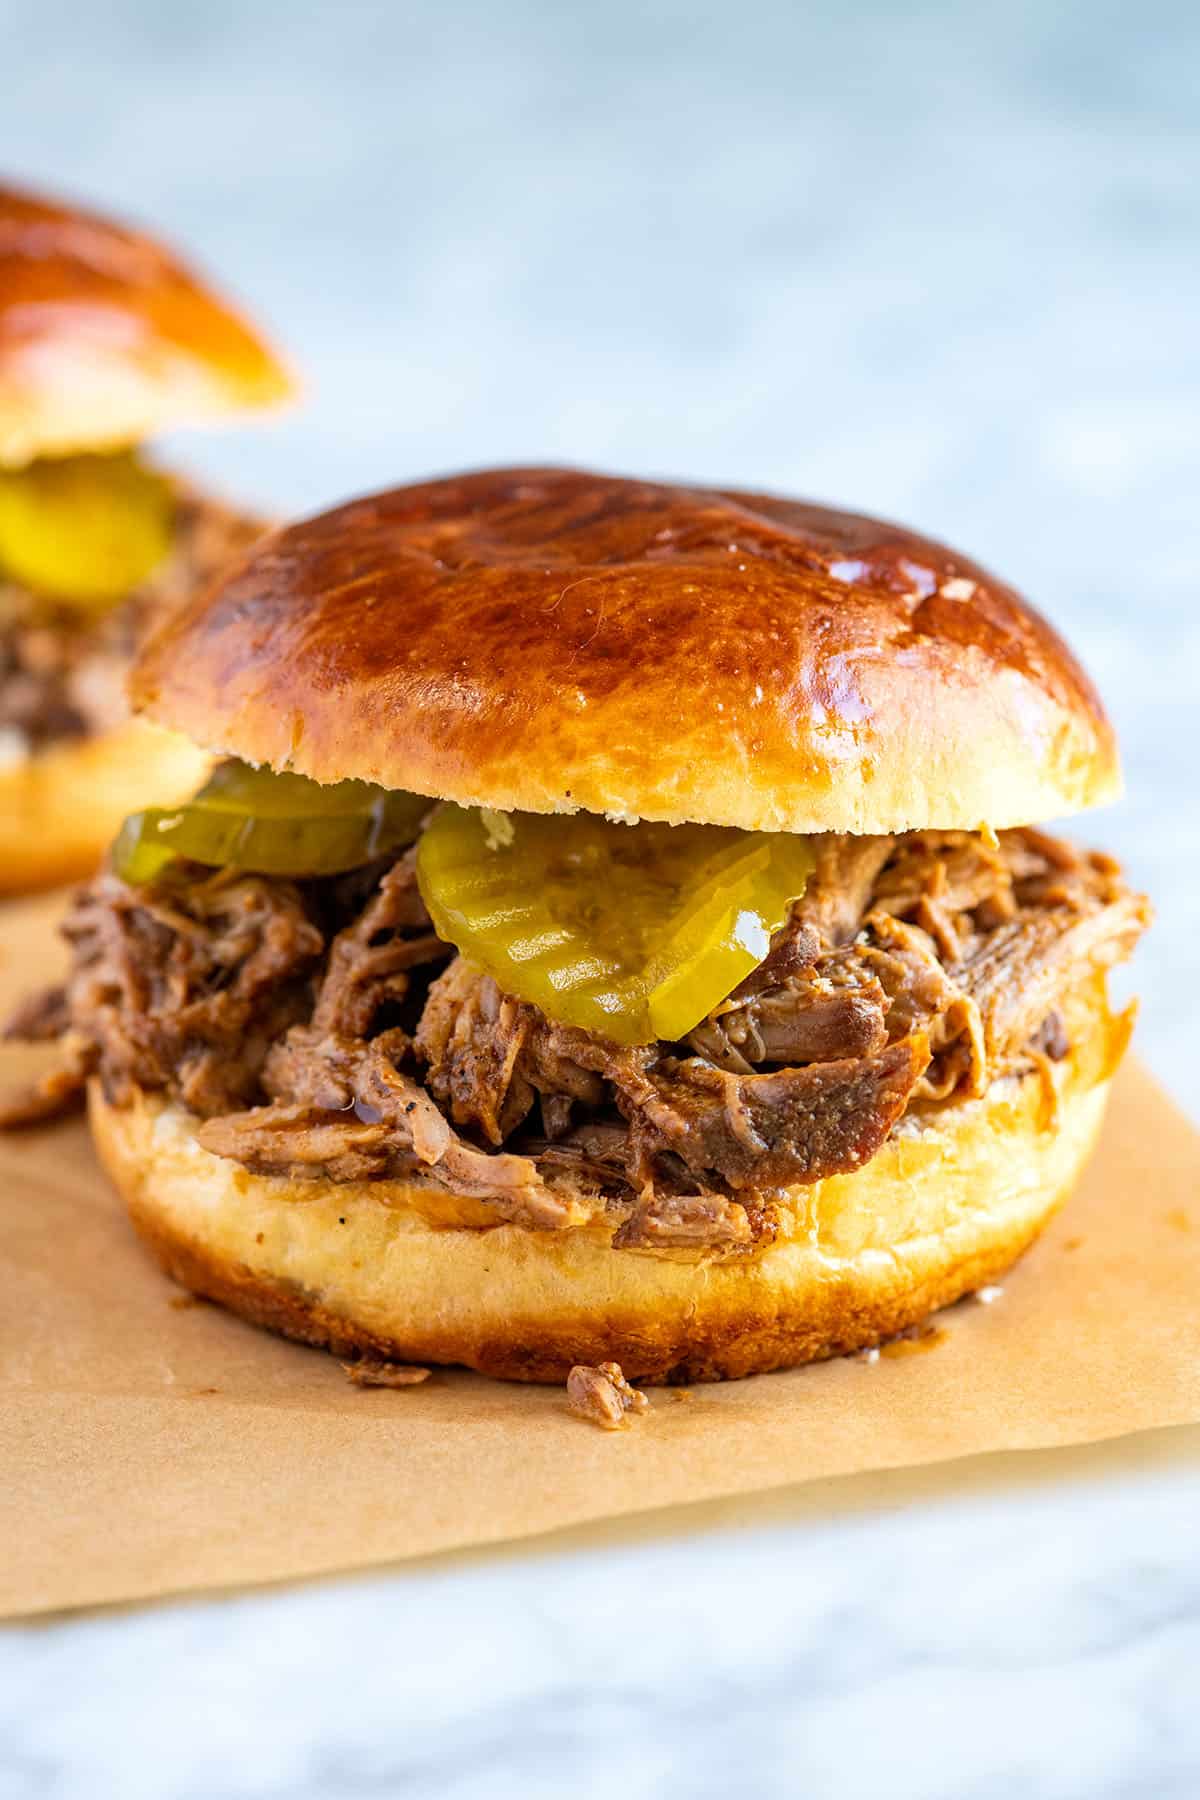 Pulled Pork served as sandwiches